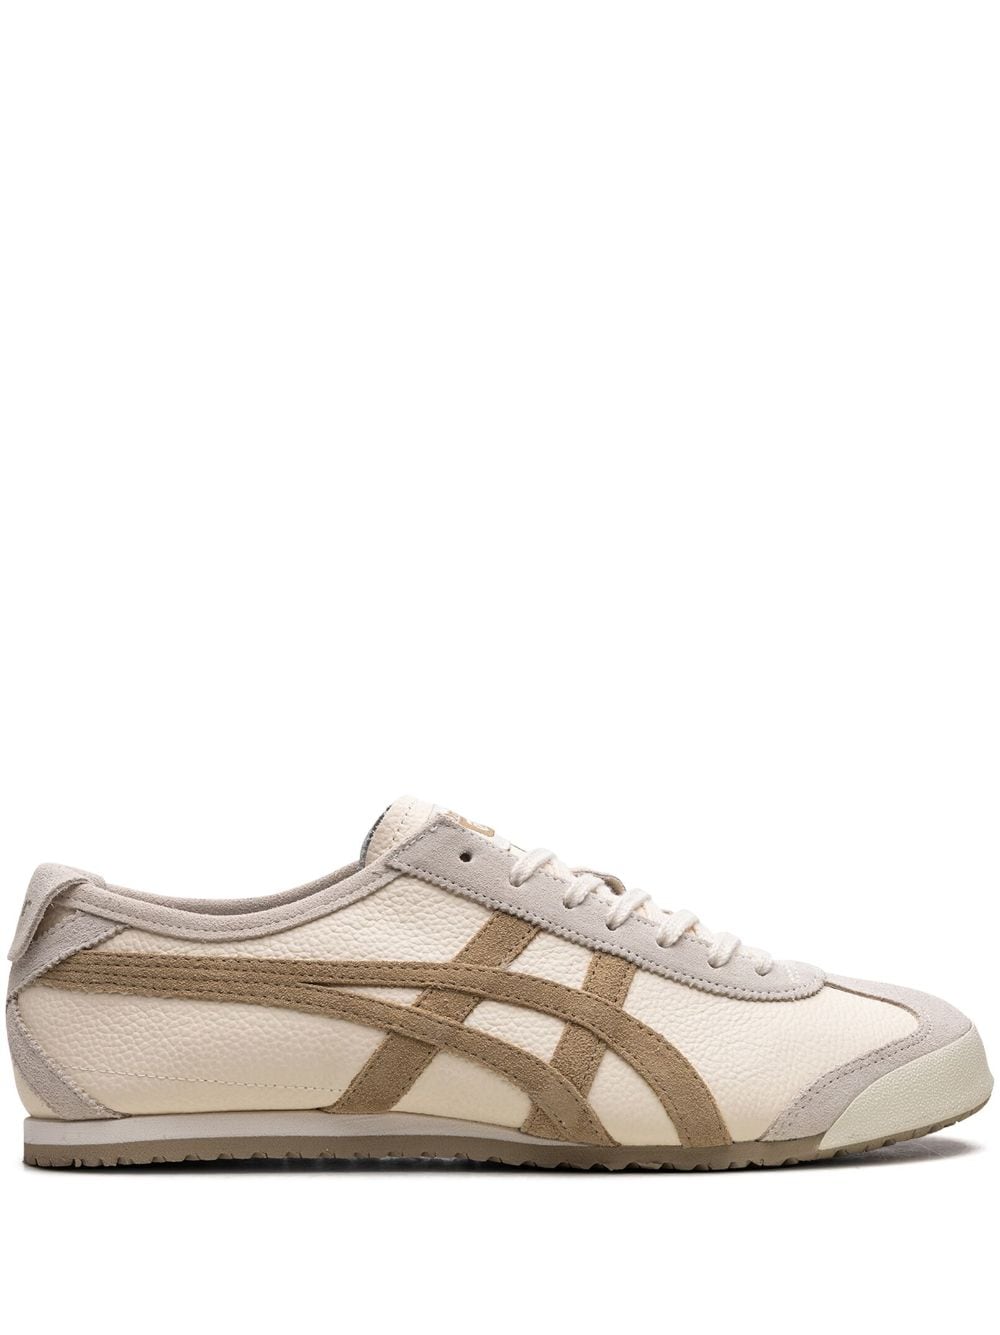 Onitsuka Tiger Mexico 66 Vin "white/grey/brown" Trainers In Neutrals